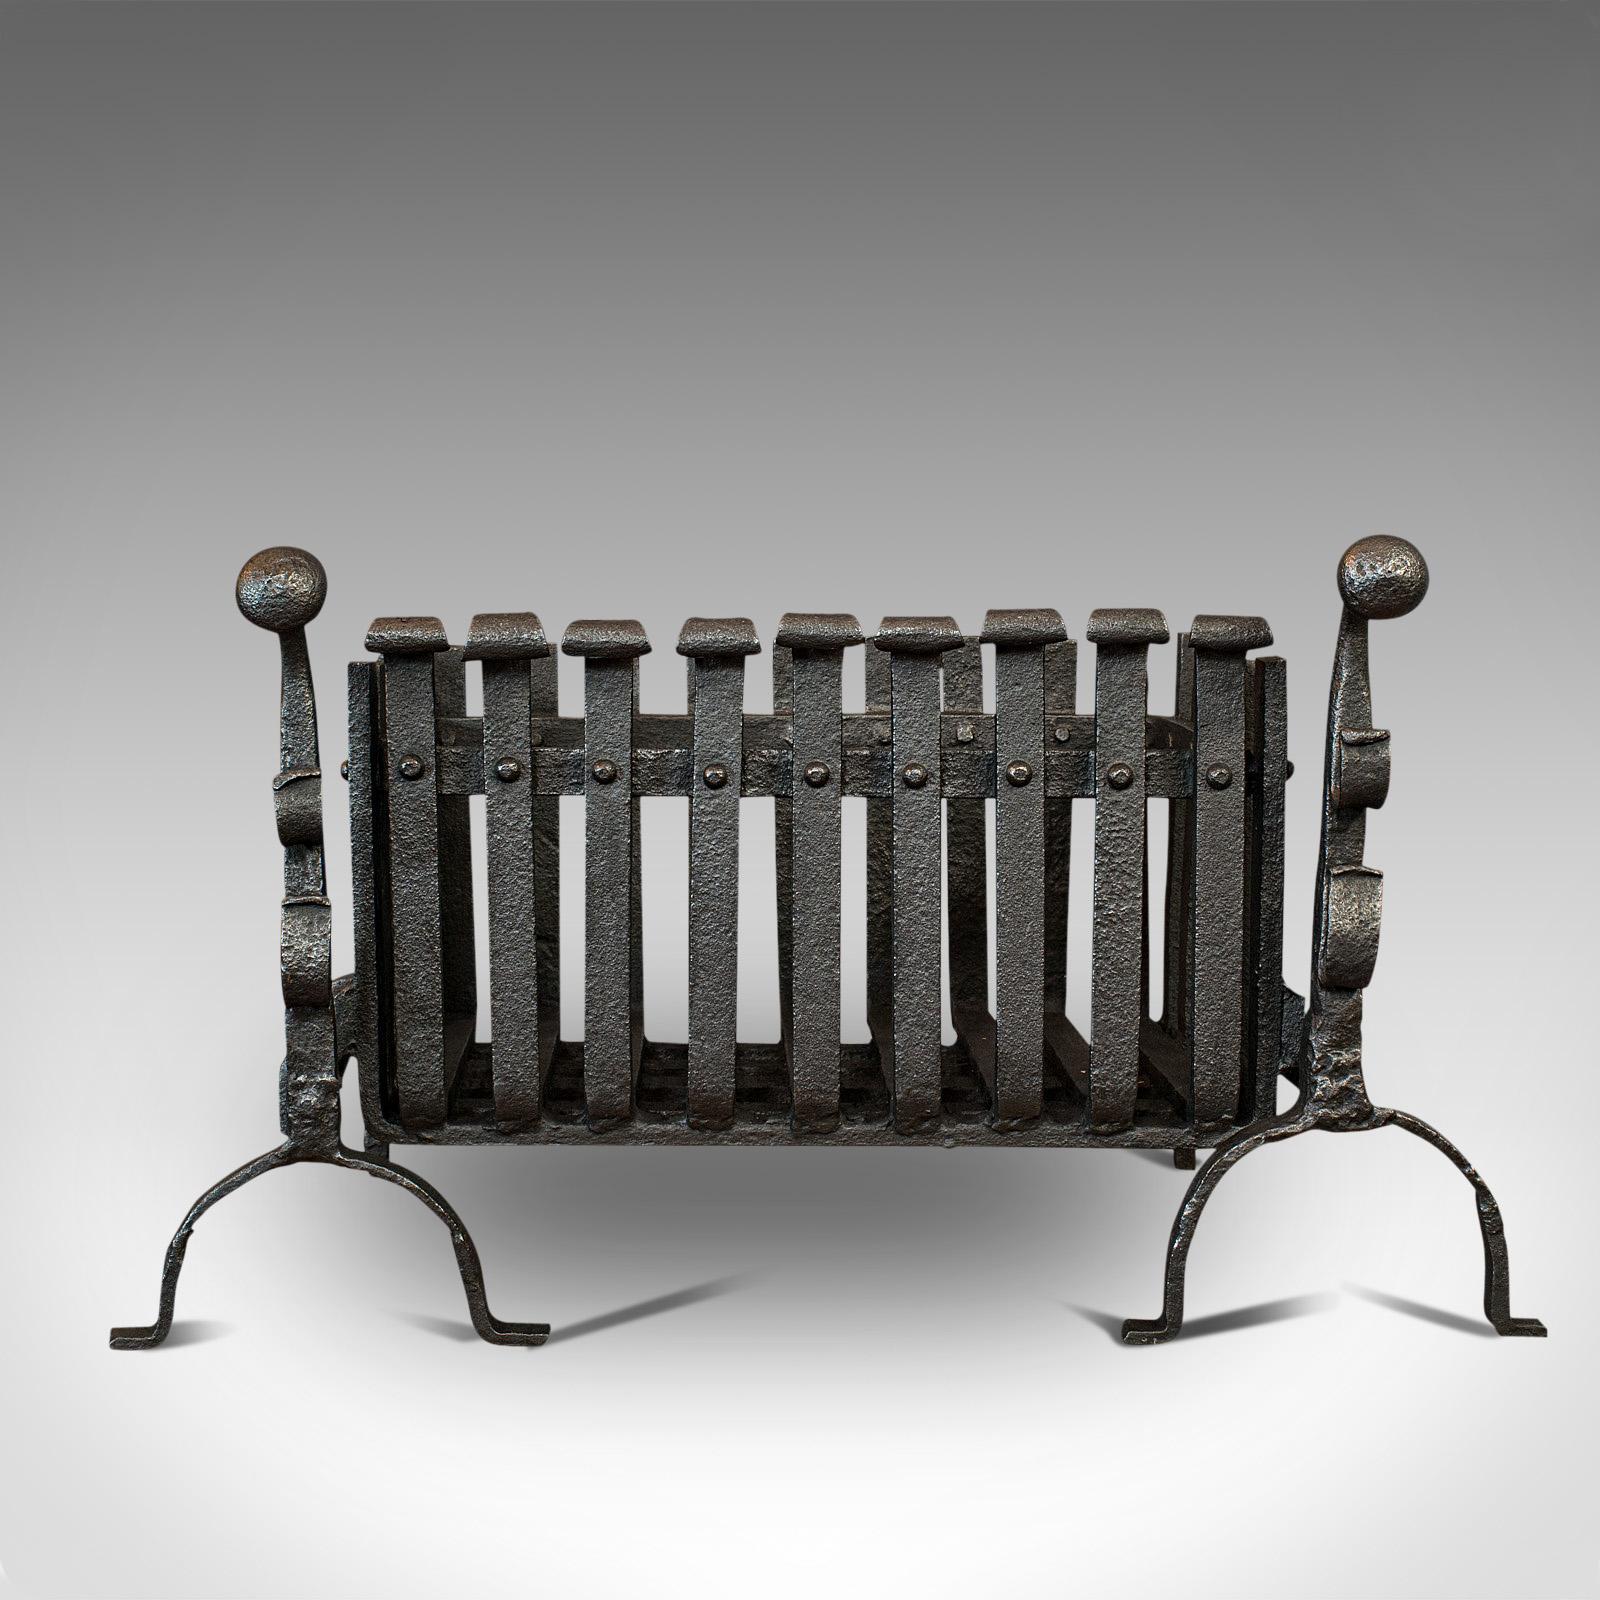 This is an antique fire basket with andirons. An English, cast iron fireside set with grate and fire dogs, dating to the Victorian period, circa 1900.

Furnish the hearth with Victorian appeal
Displaying a desirable aged patina
Cast and wrought